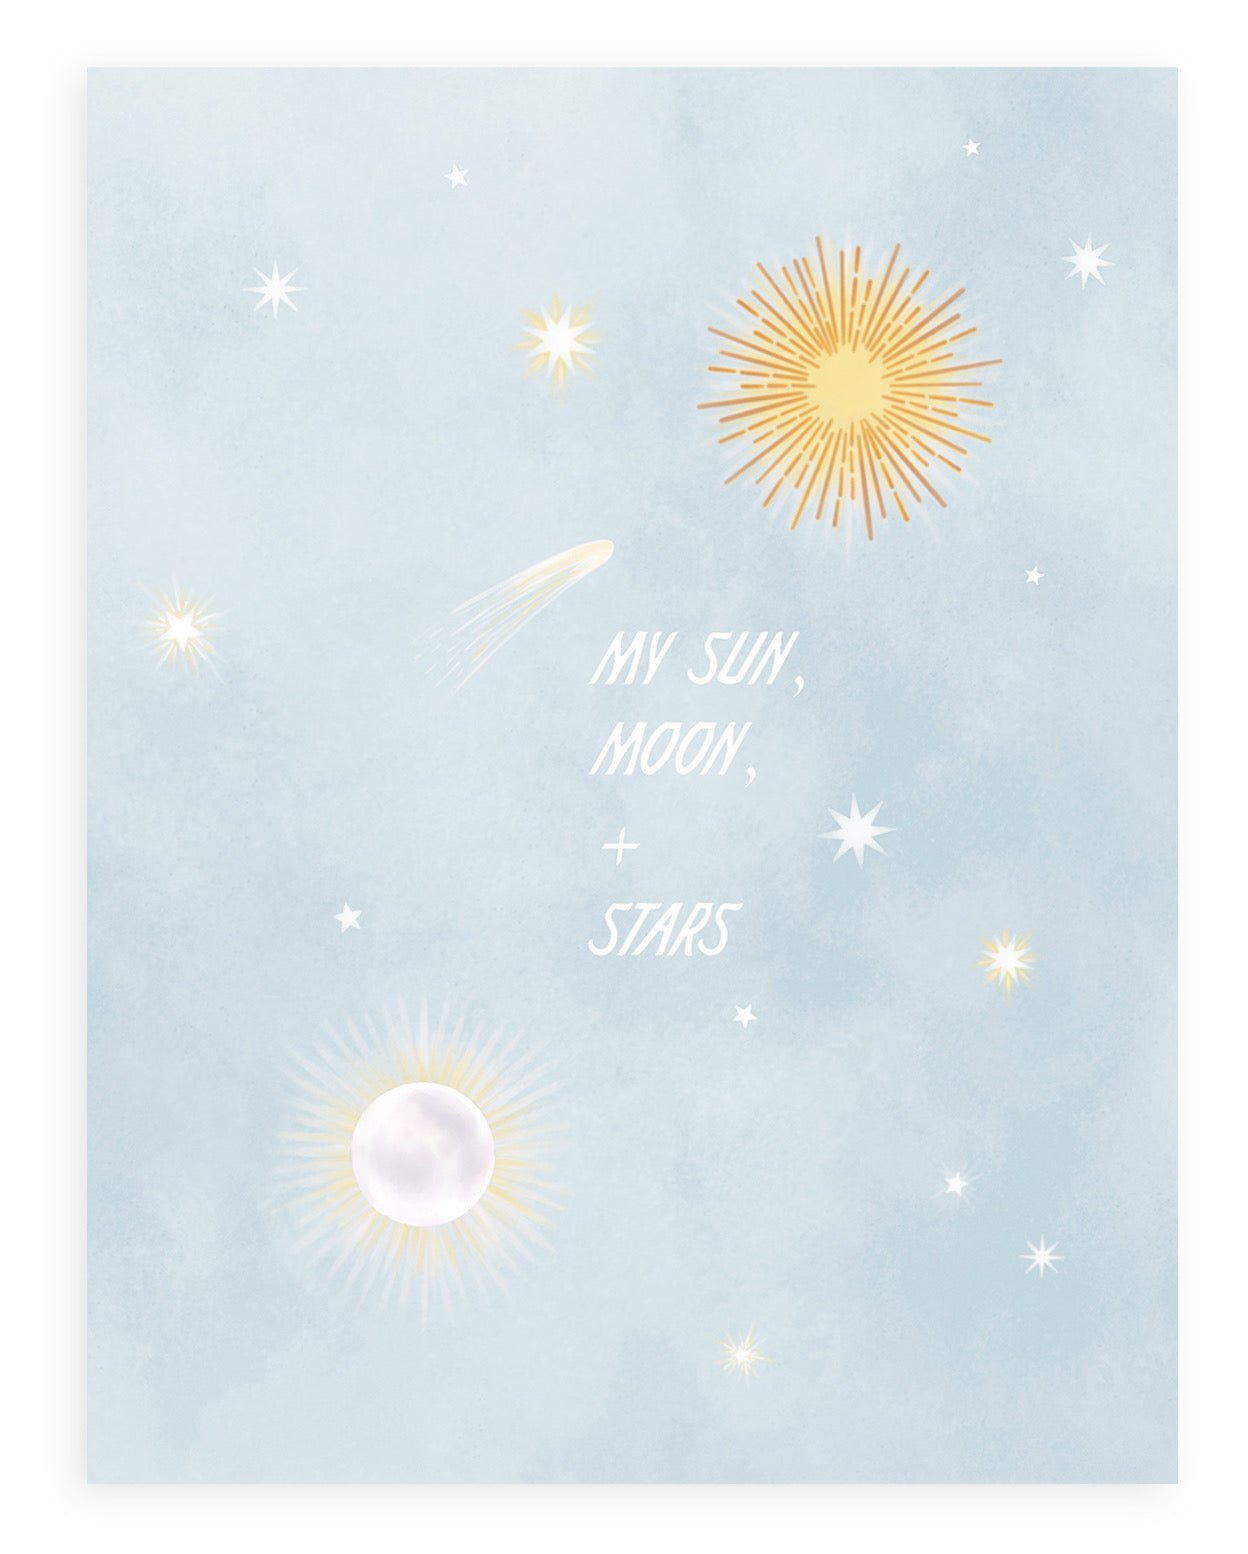 Blue sky with sun, moon, stars and text that reads &quot;My Sun, Moon, + Stars.&quot; Shown on white background.